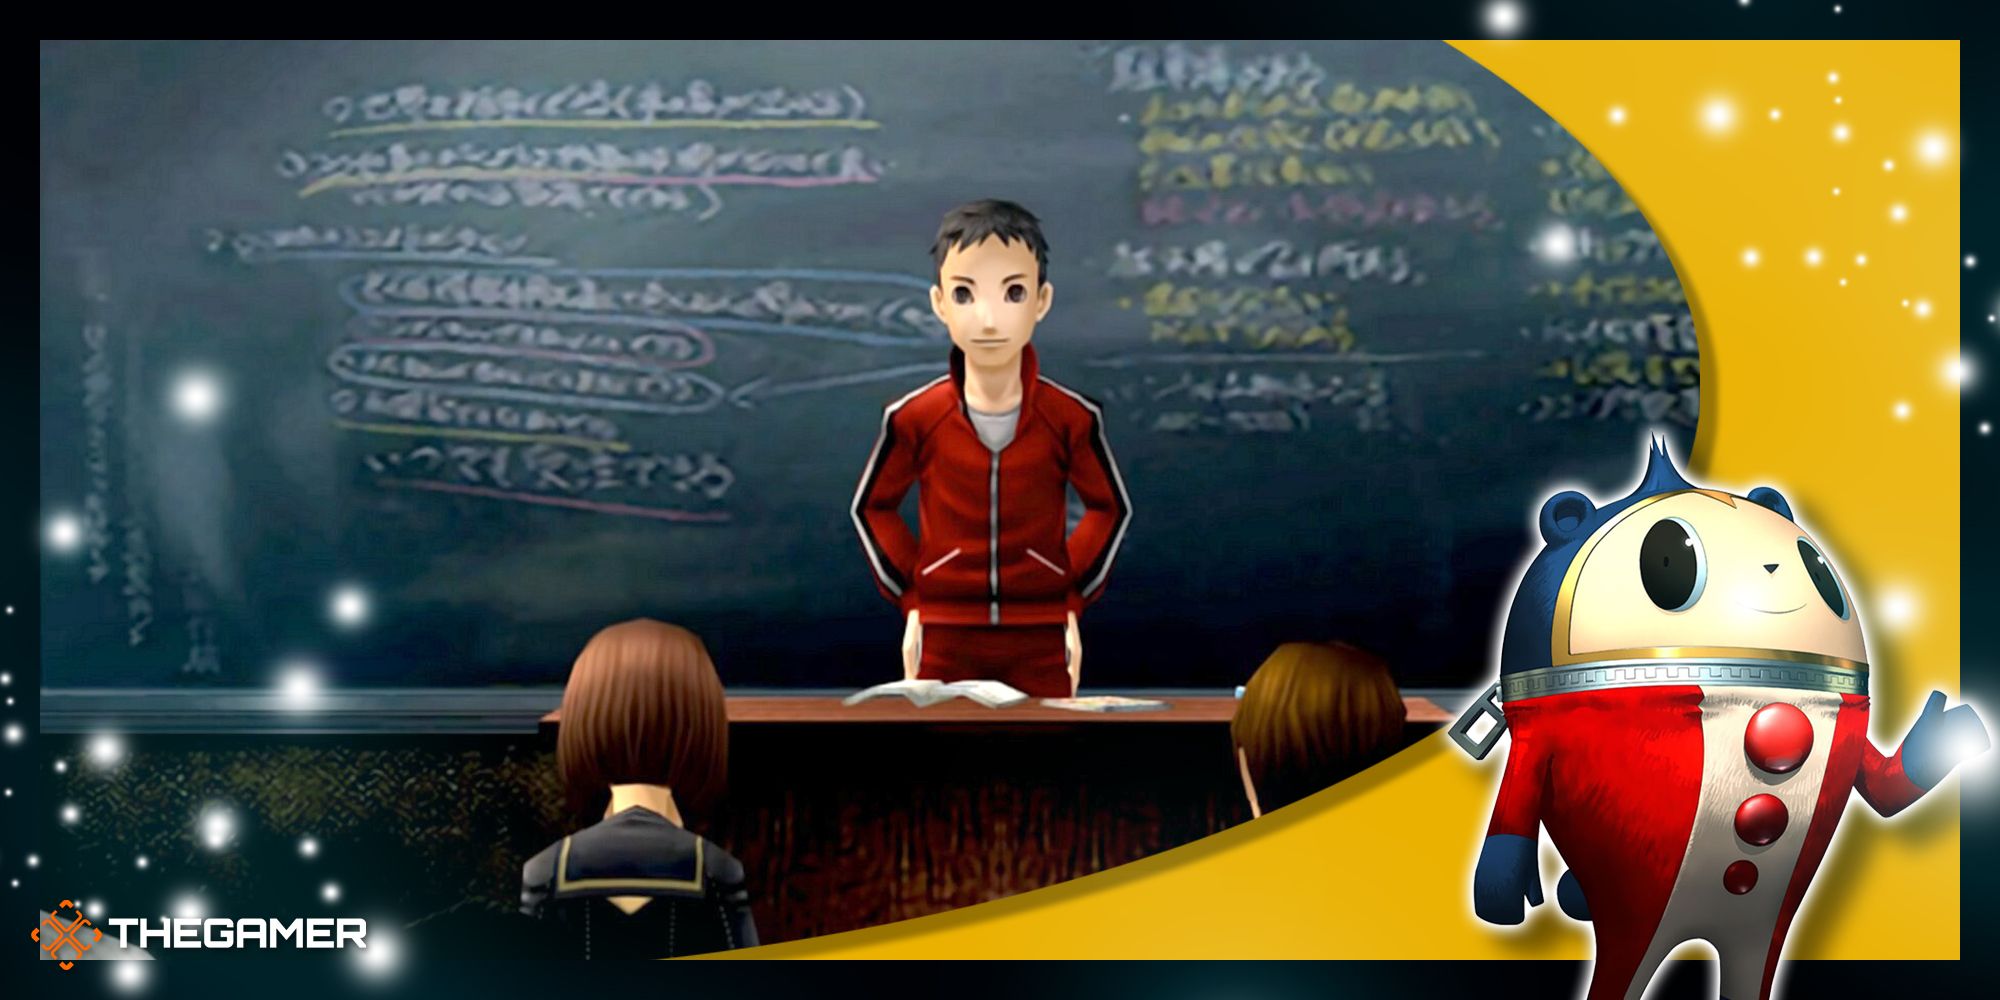 Persona 4 Golden - A teacher standing at the front of the classroom with a Teddie overlay in the bottom corner.